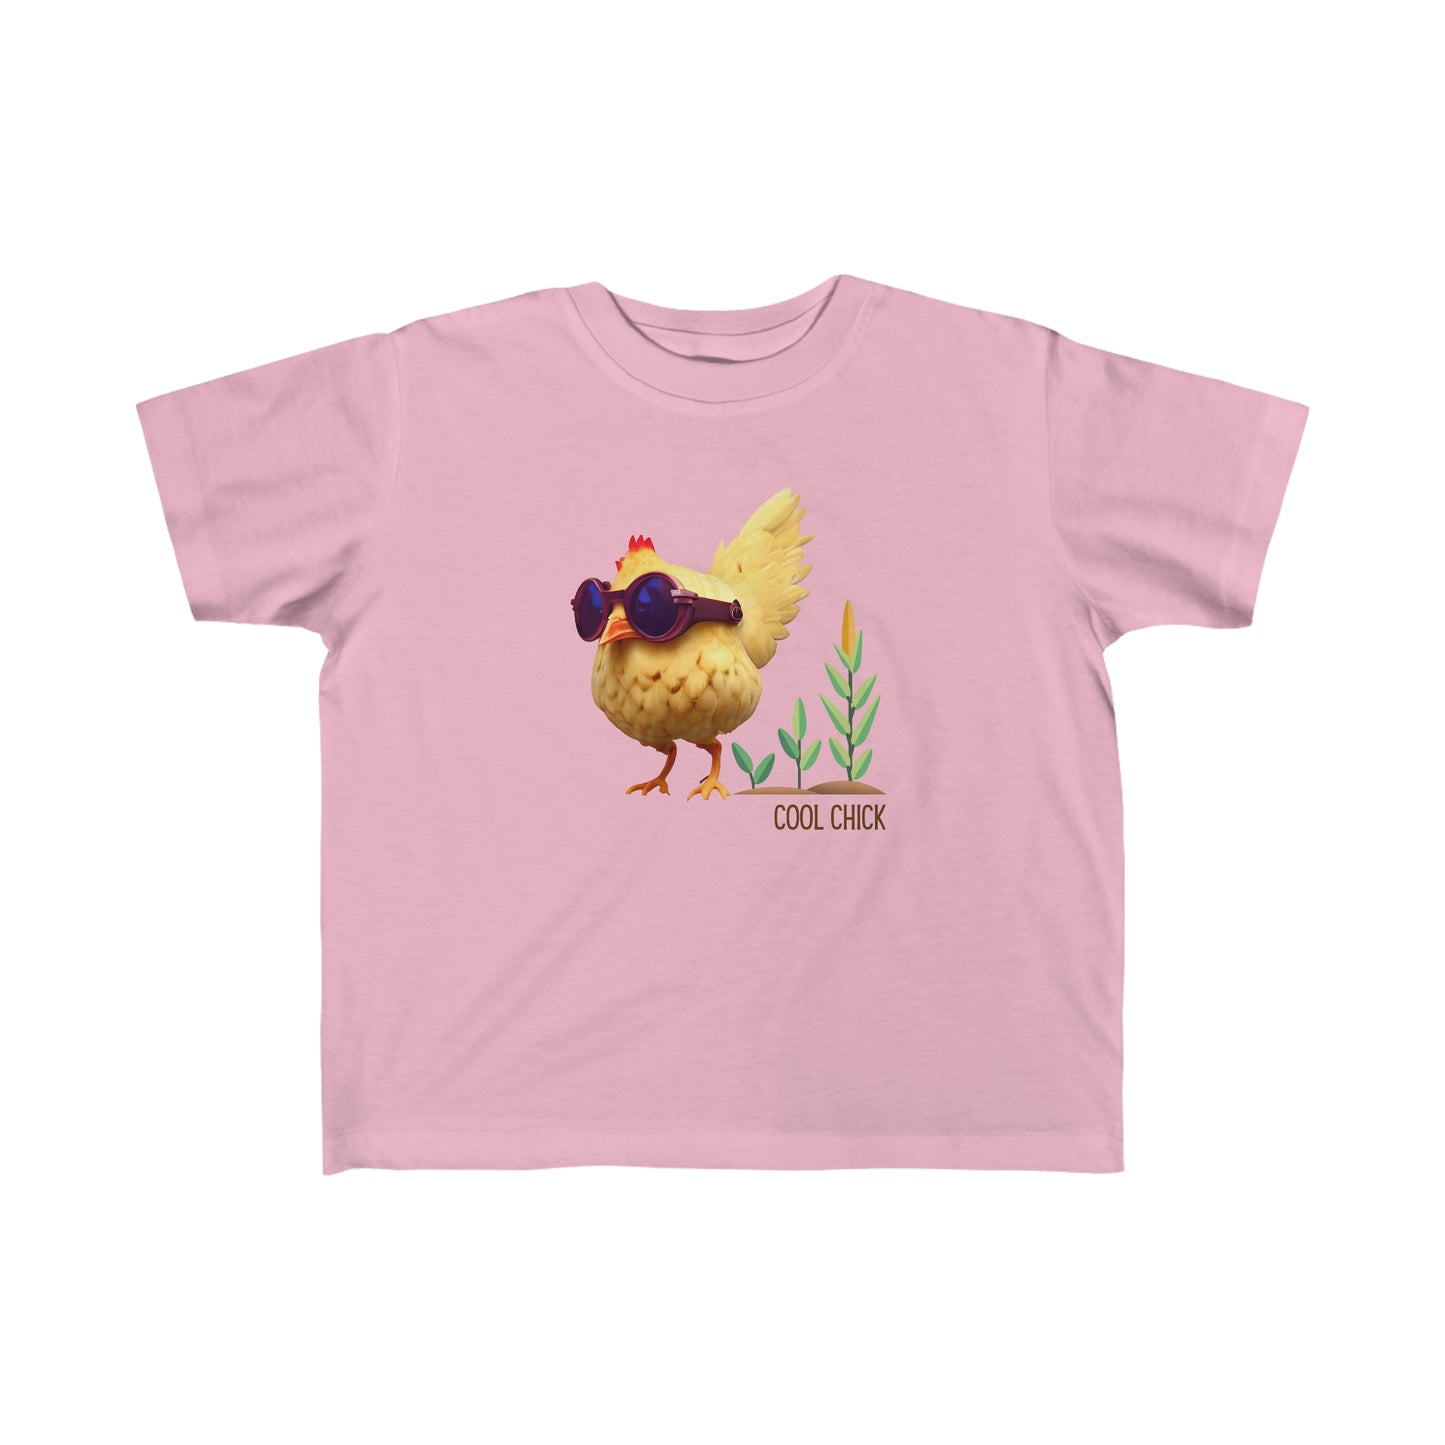 Cool Chick T-shirt in Pink